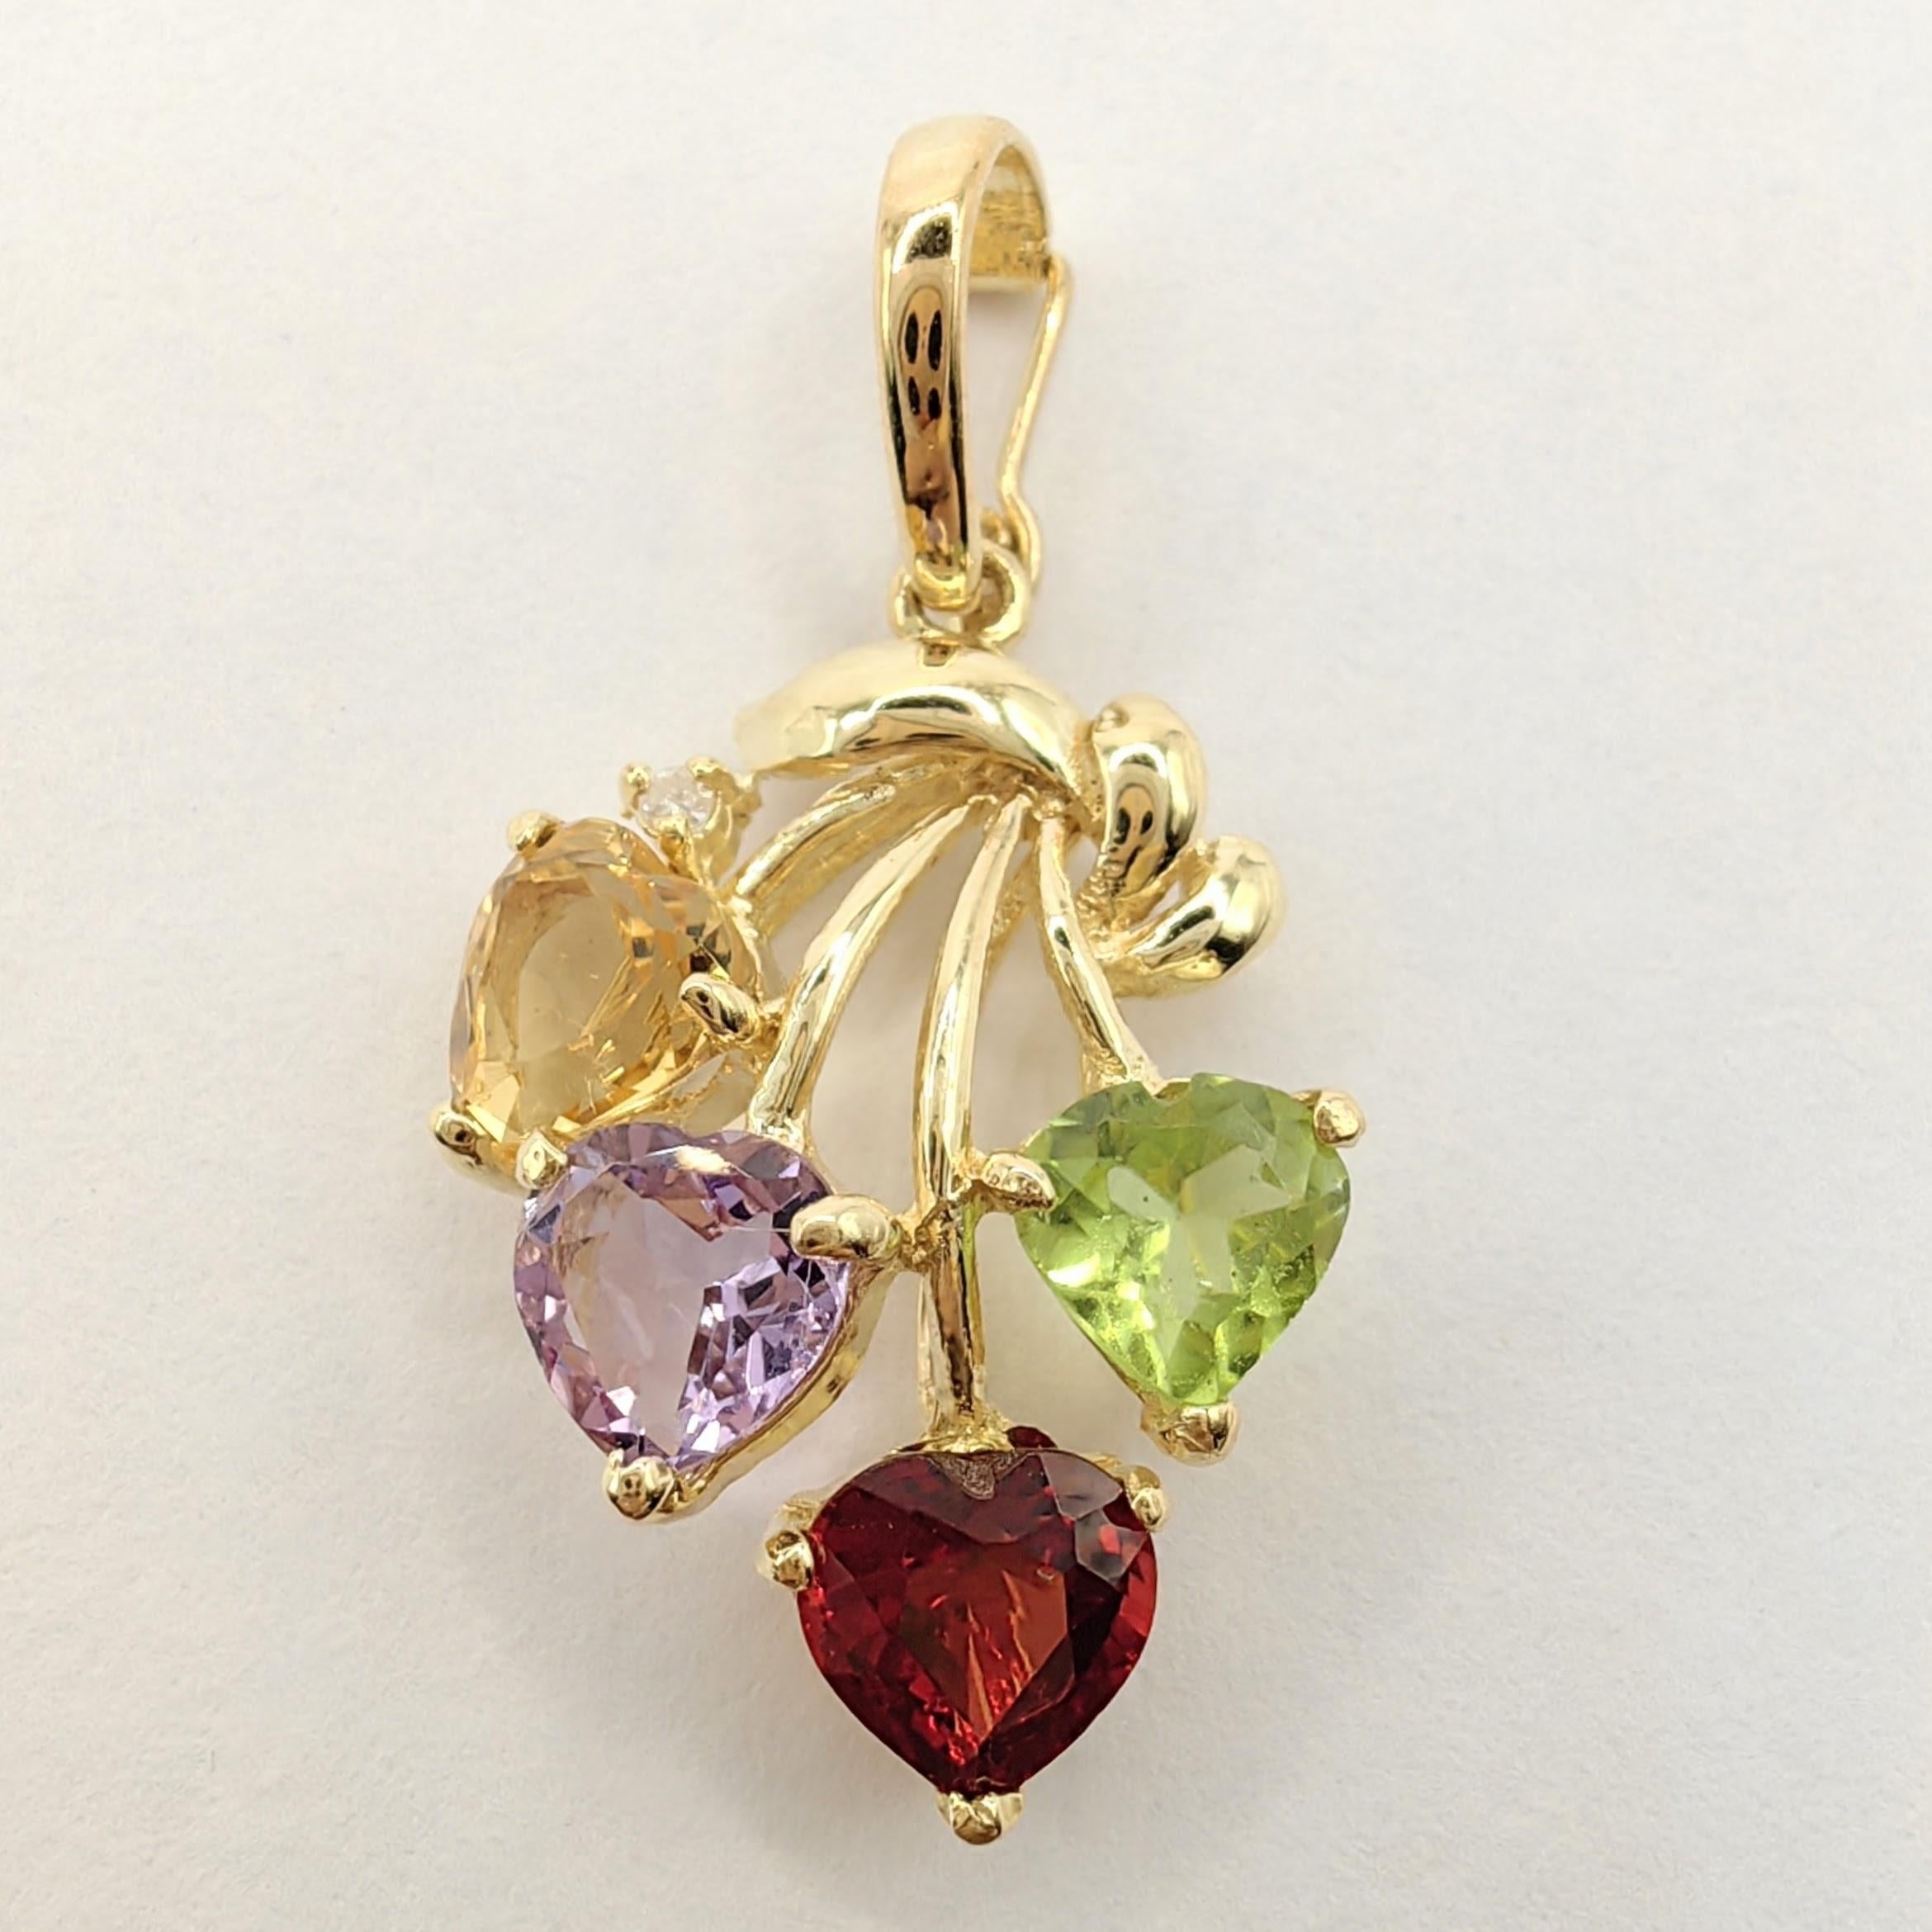 Contemporary 1980's Heart Shaped Amethyst, Citrine, Garnet, Peridot 14k Gold Necklace Pendant For Sale